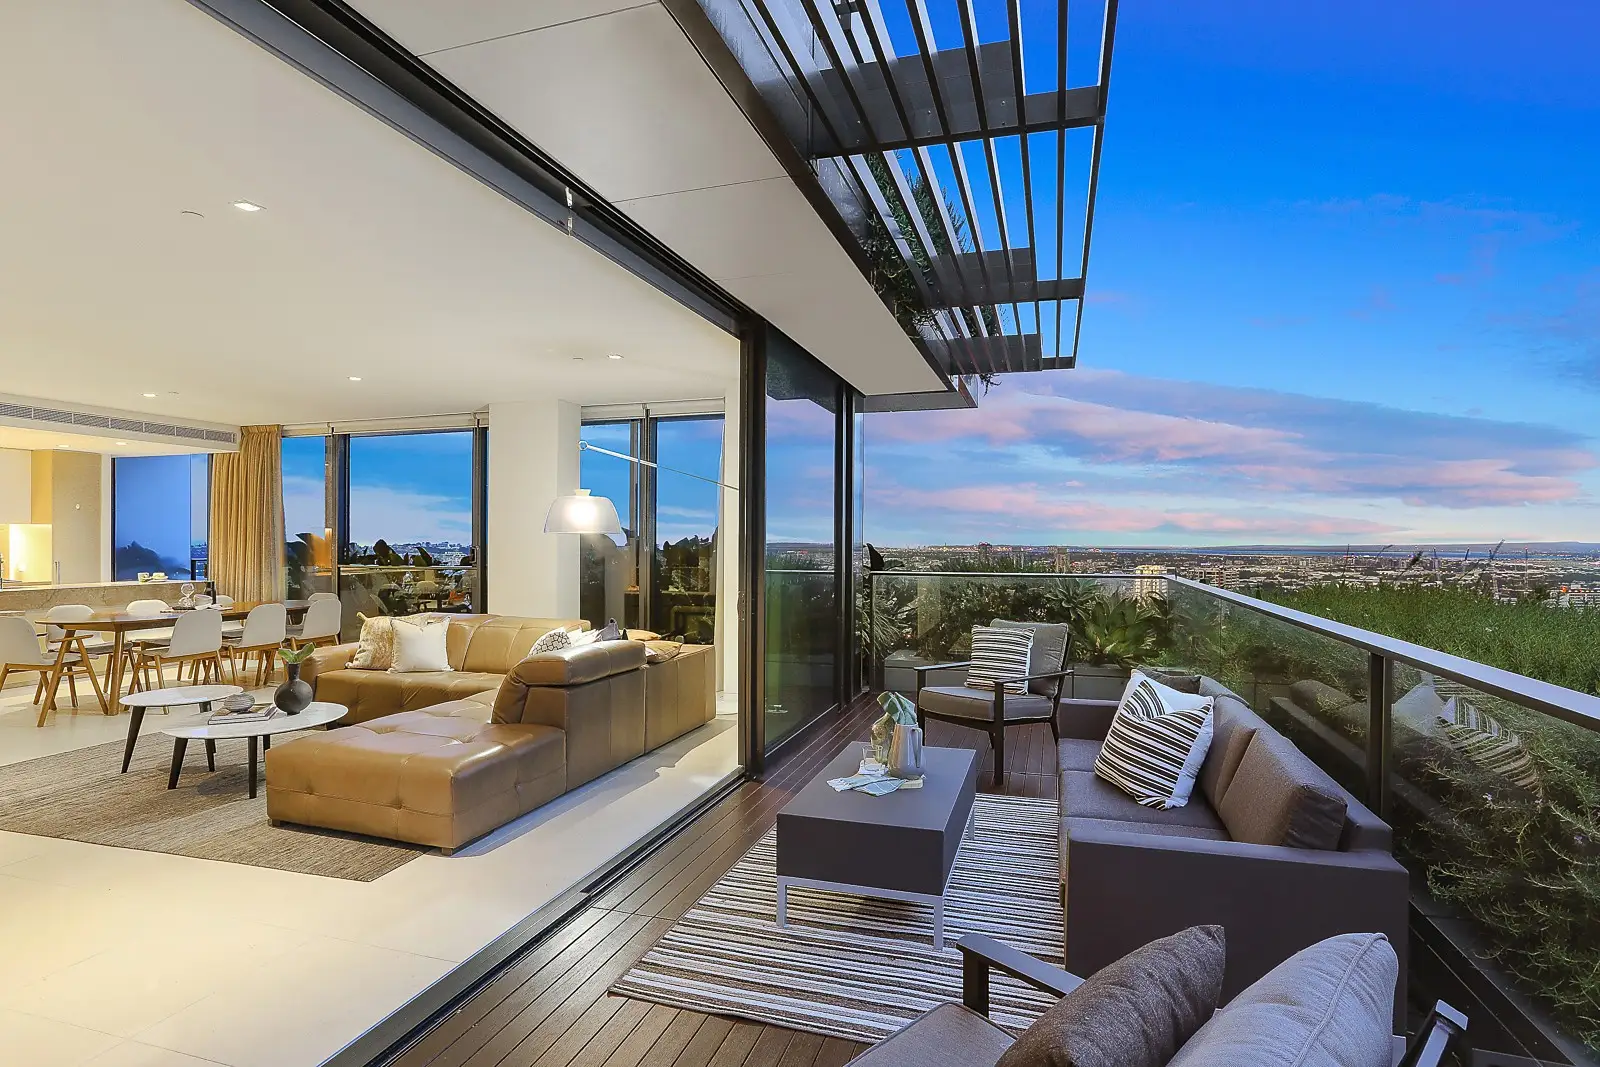 Photo #3: 3107/1 Carlton Street, Chippendale - Sold by Sydney Sotheby's International Realty